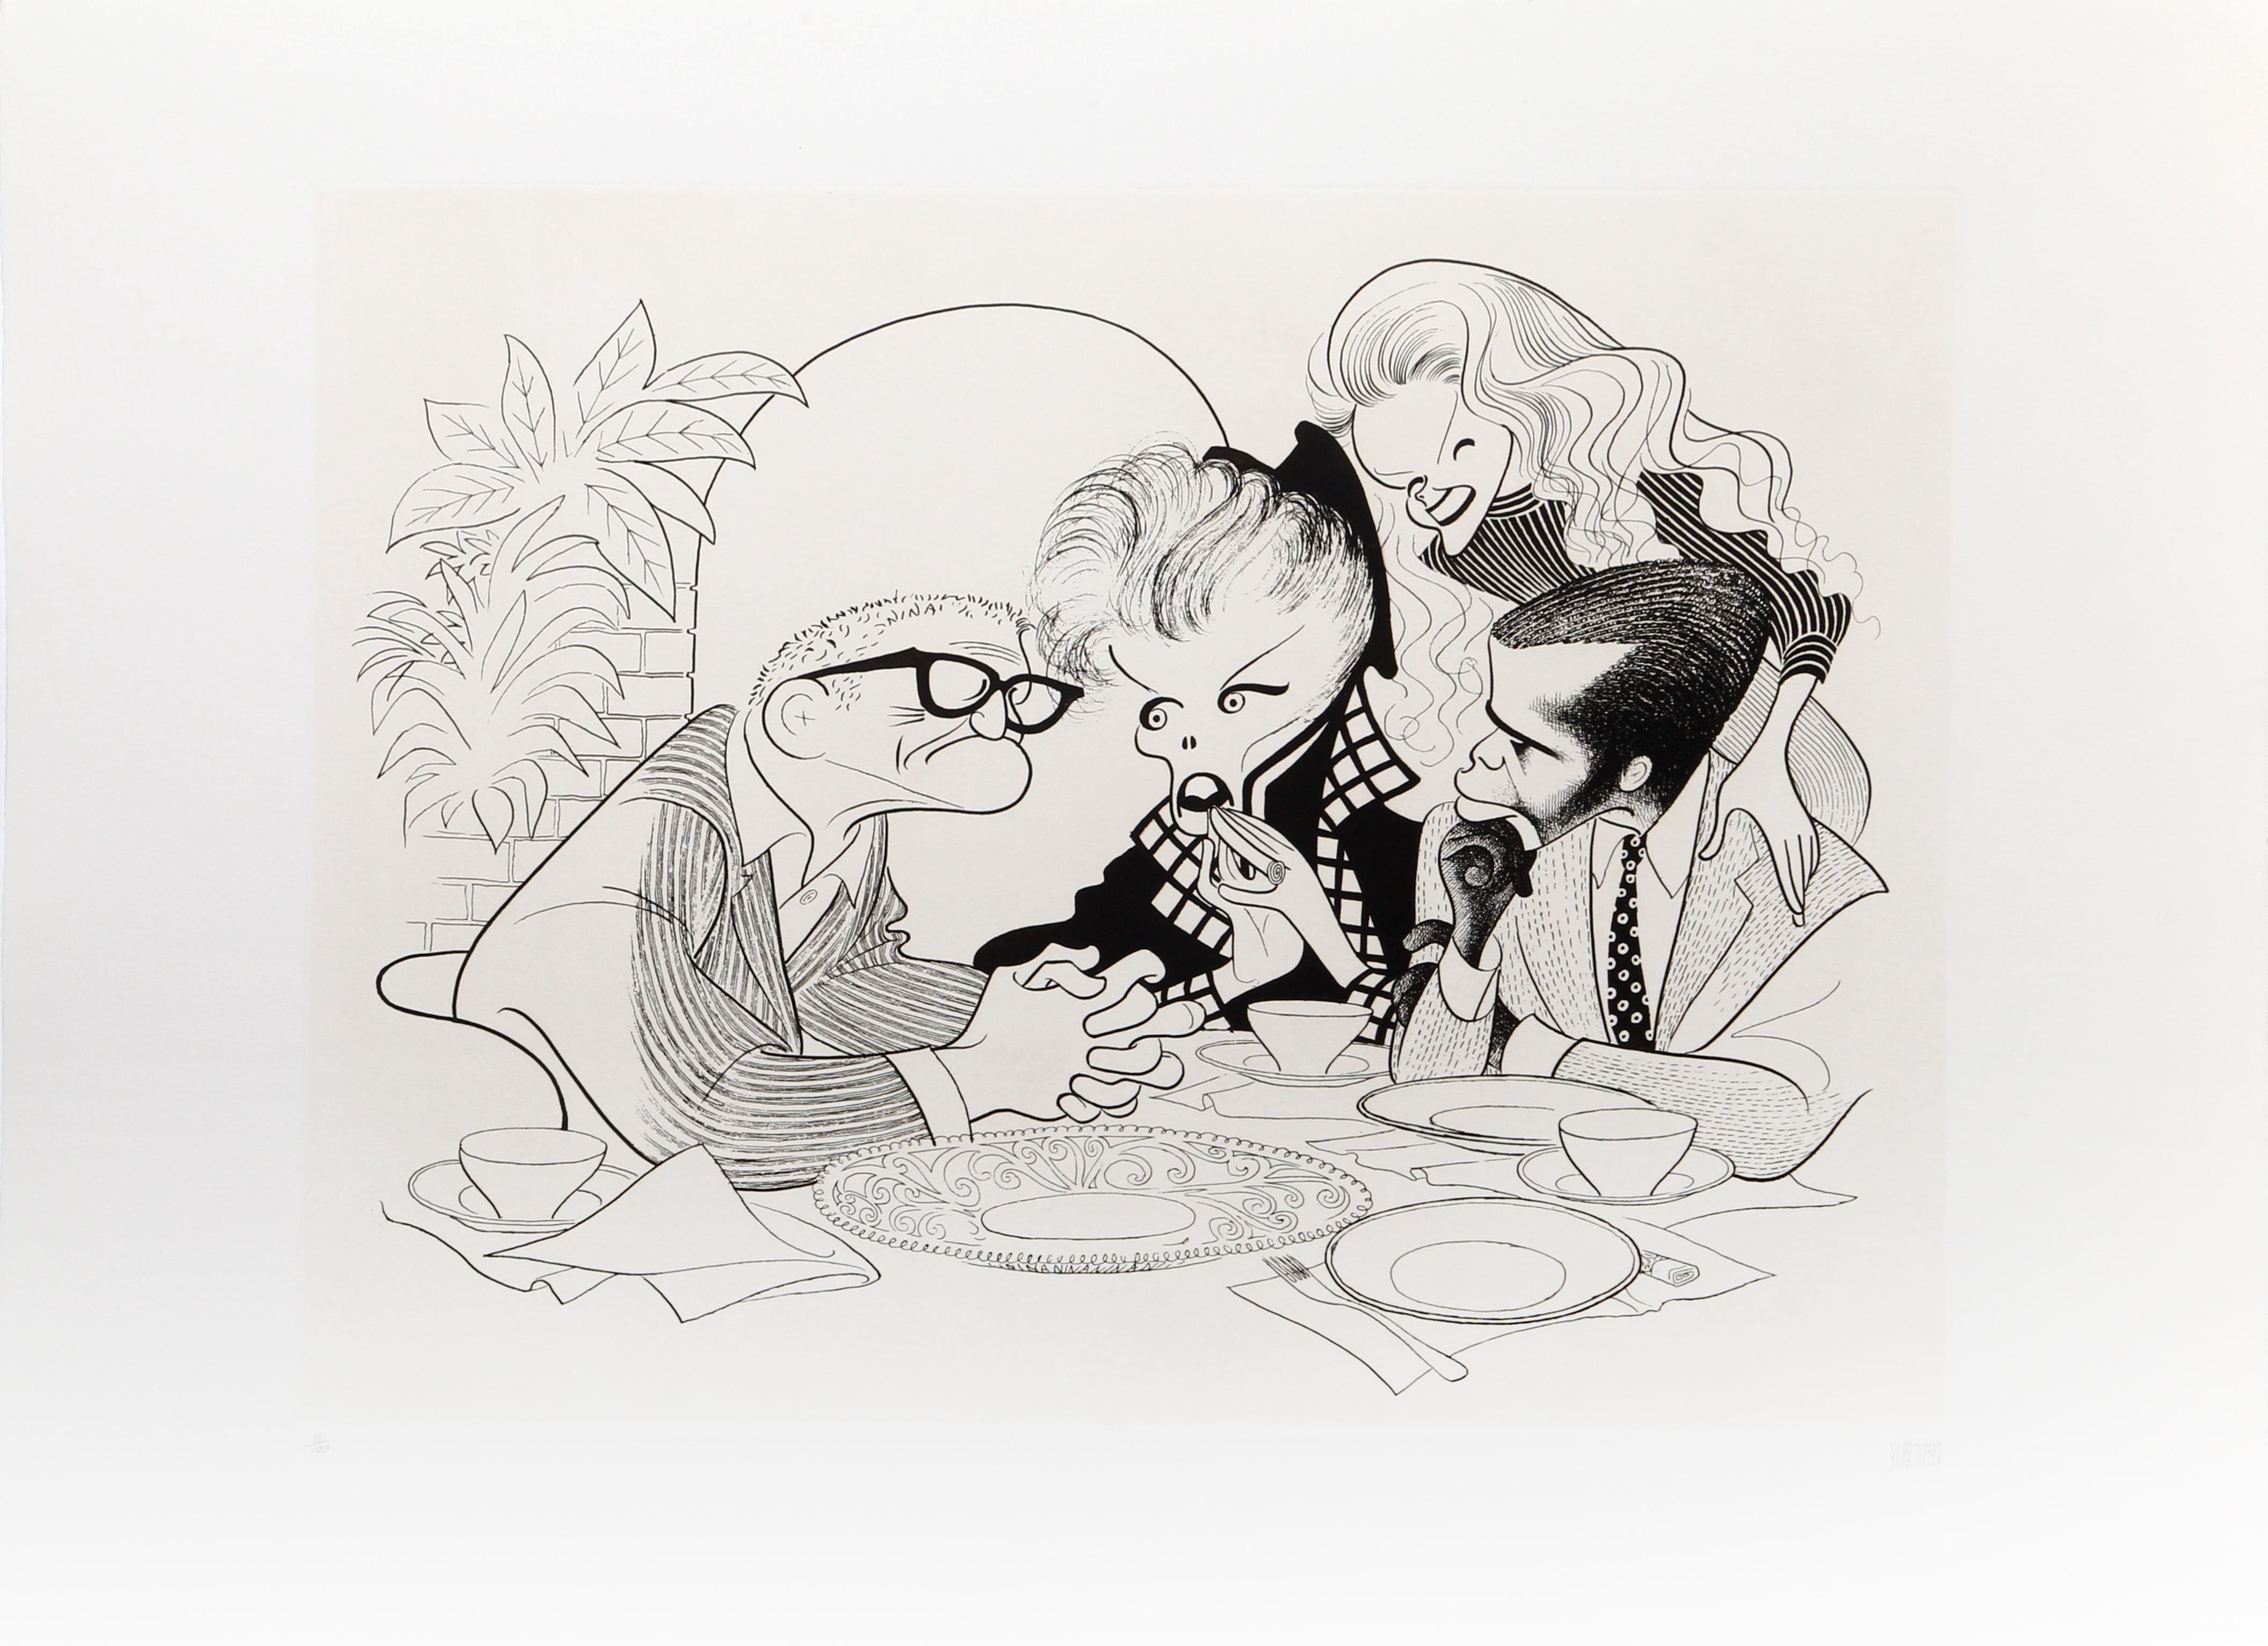 Guess Who’s Coming to Dinner by Al Hirschfeld